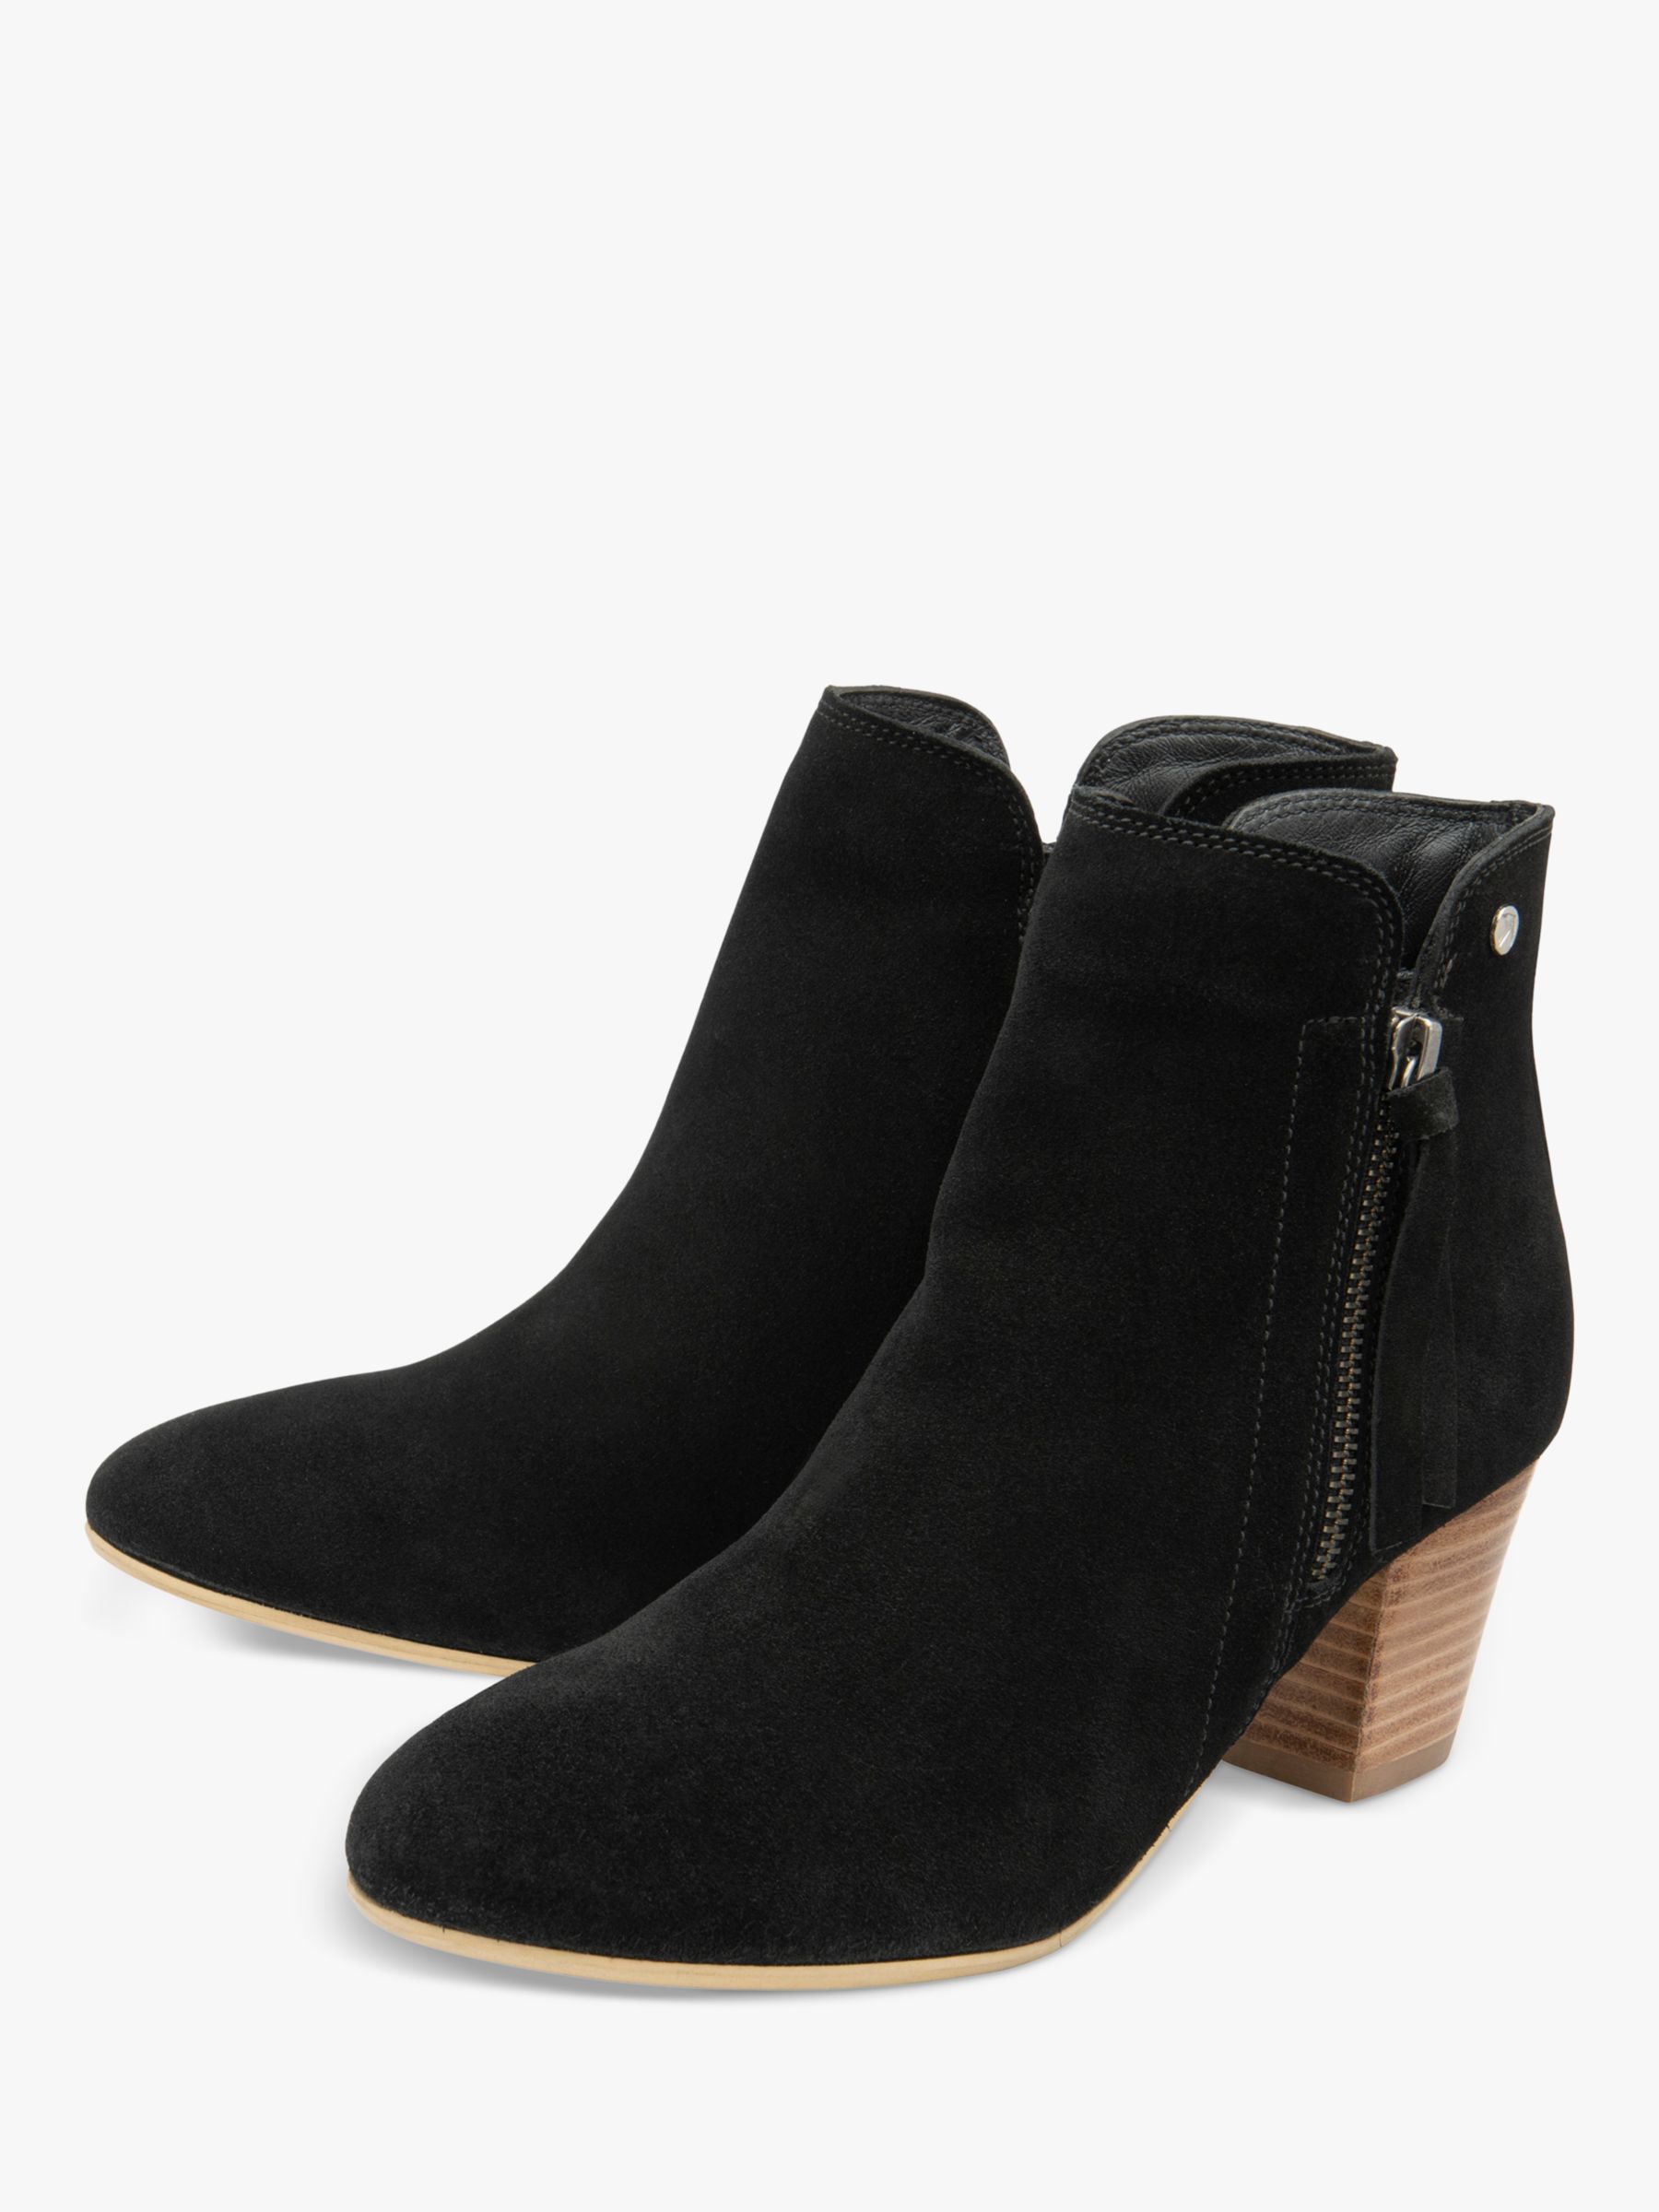 Ravel Tulli Suede Ankle Boots, Black, 7